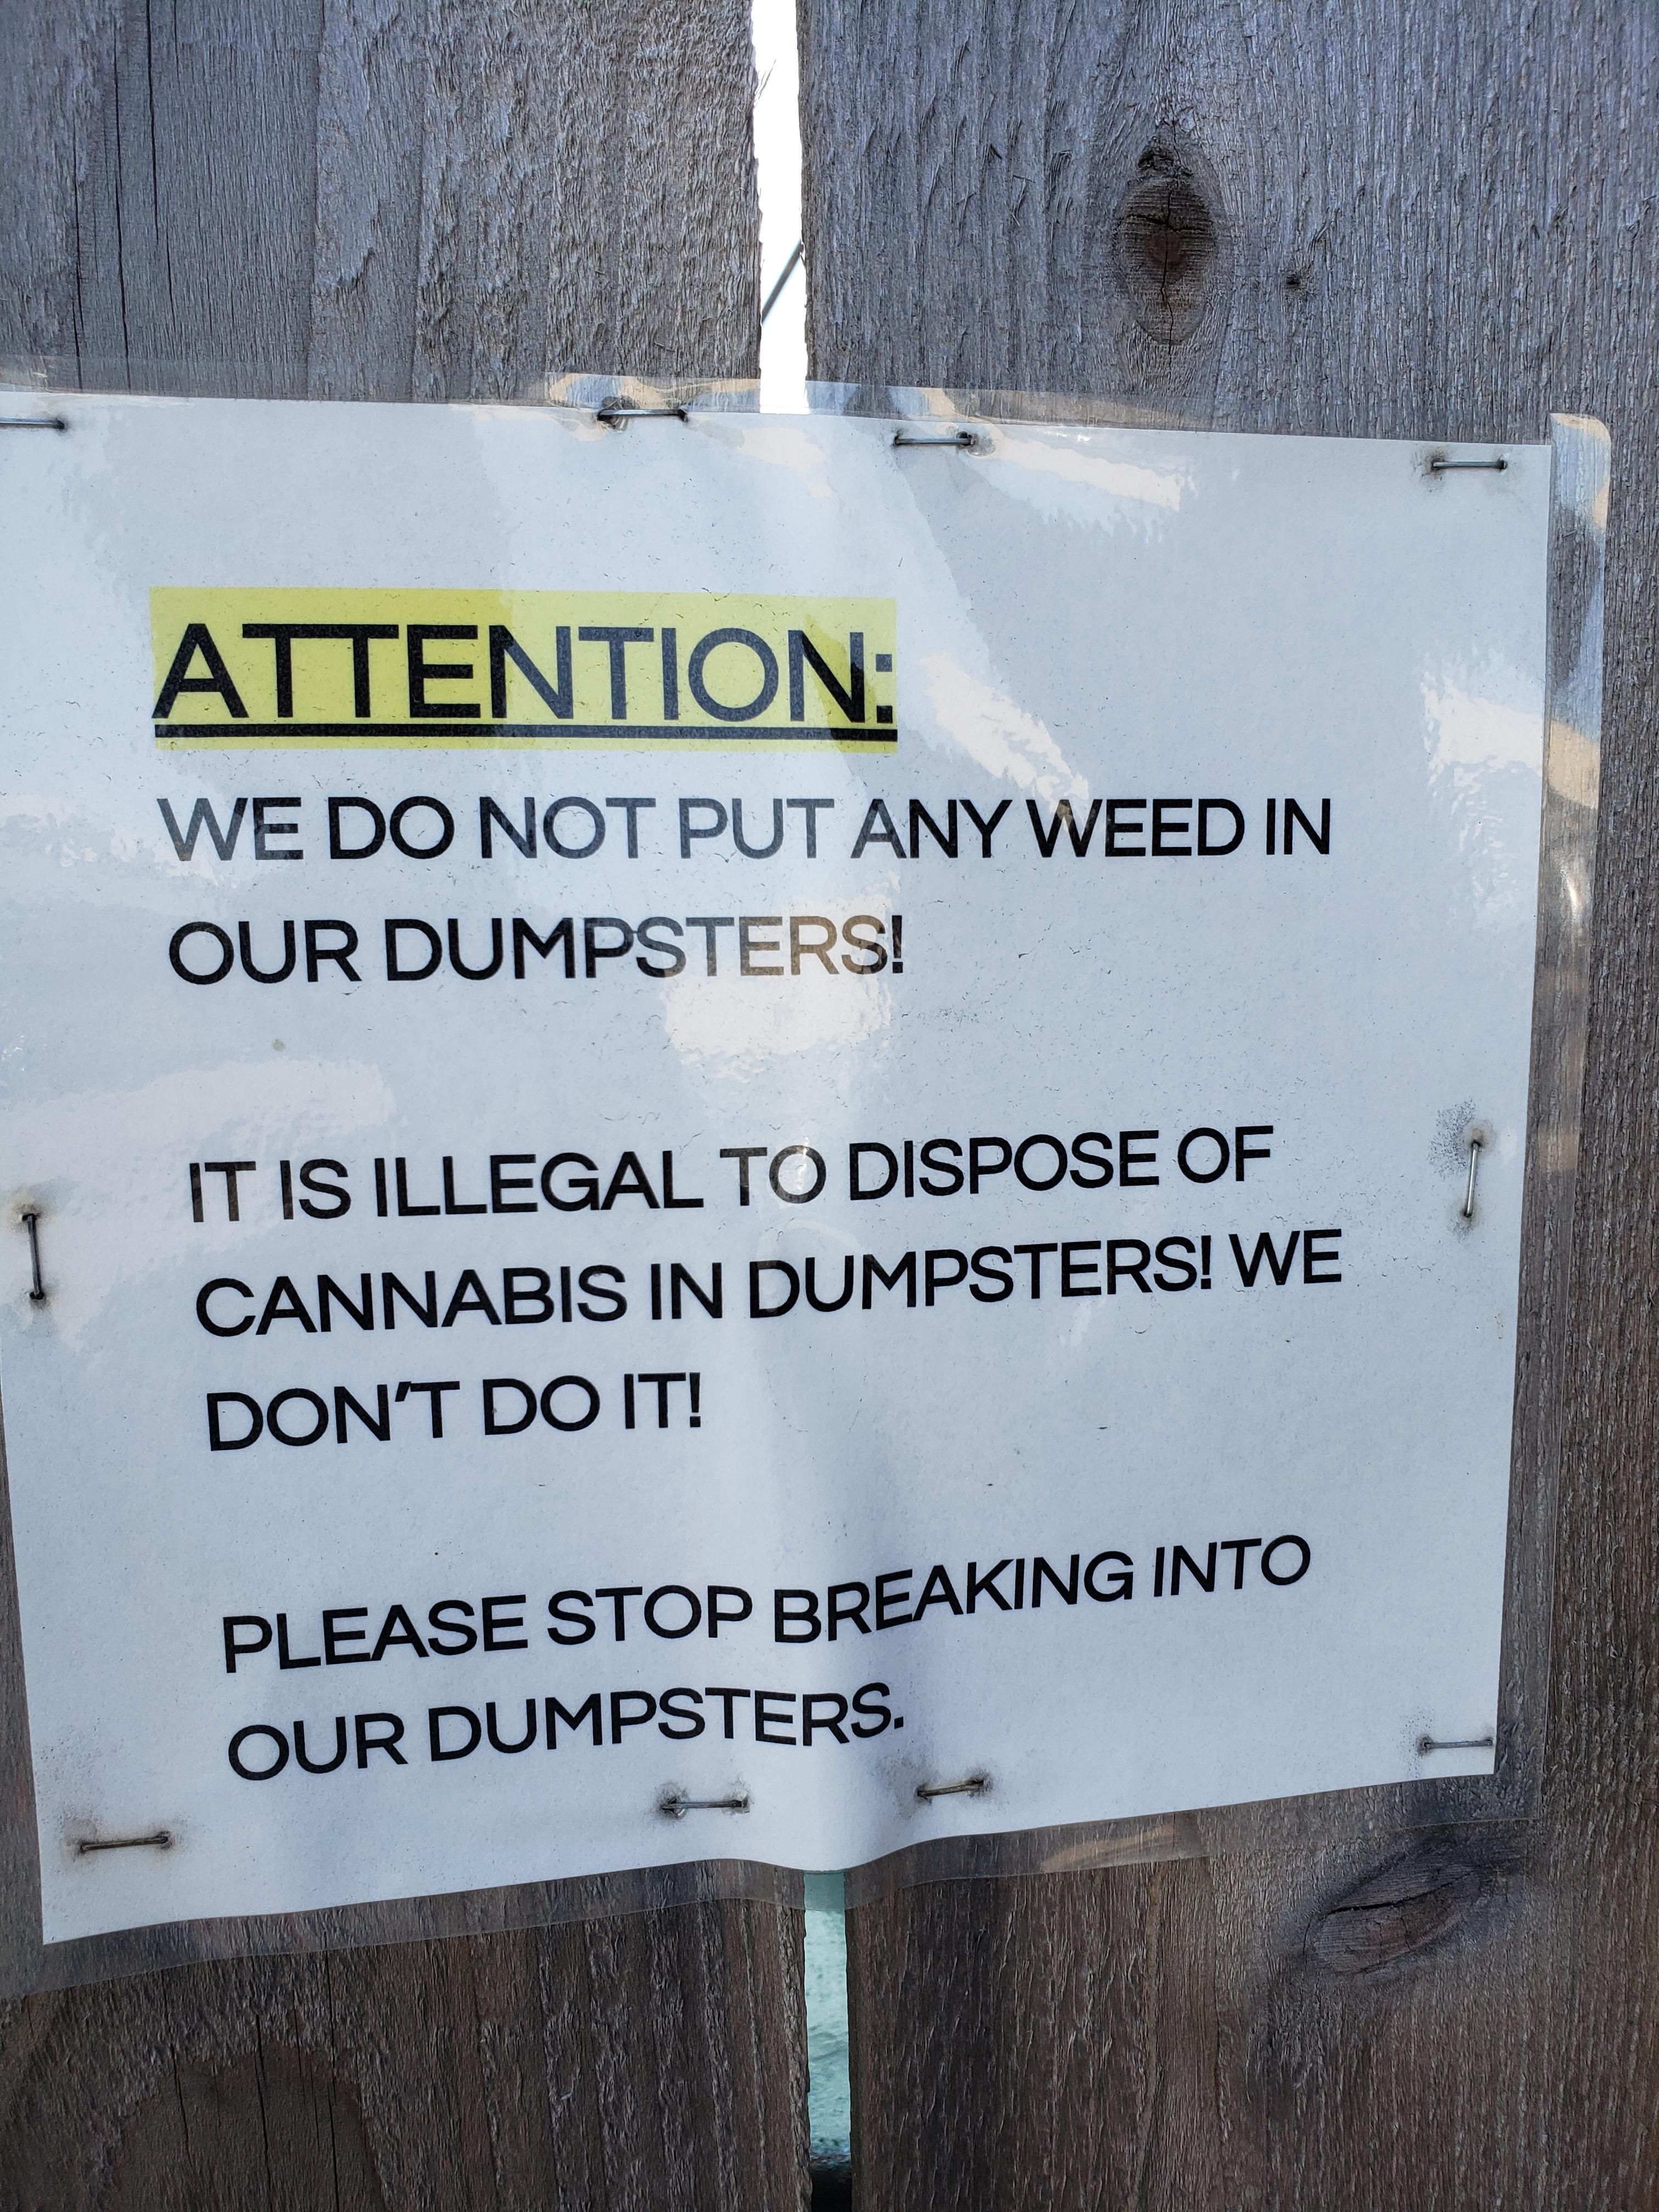 Saw this outside a weed dispensary in Washington.